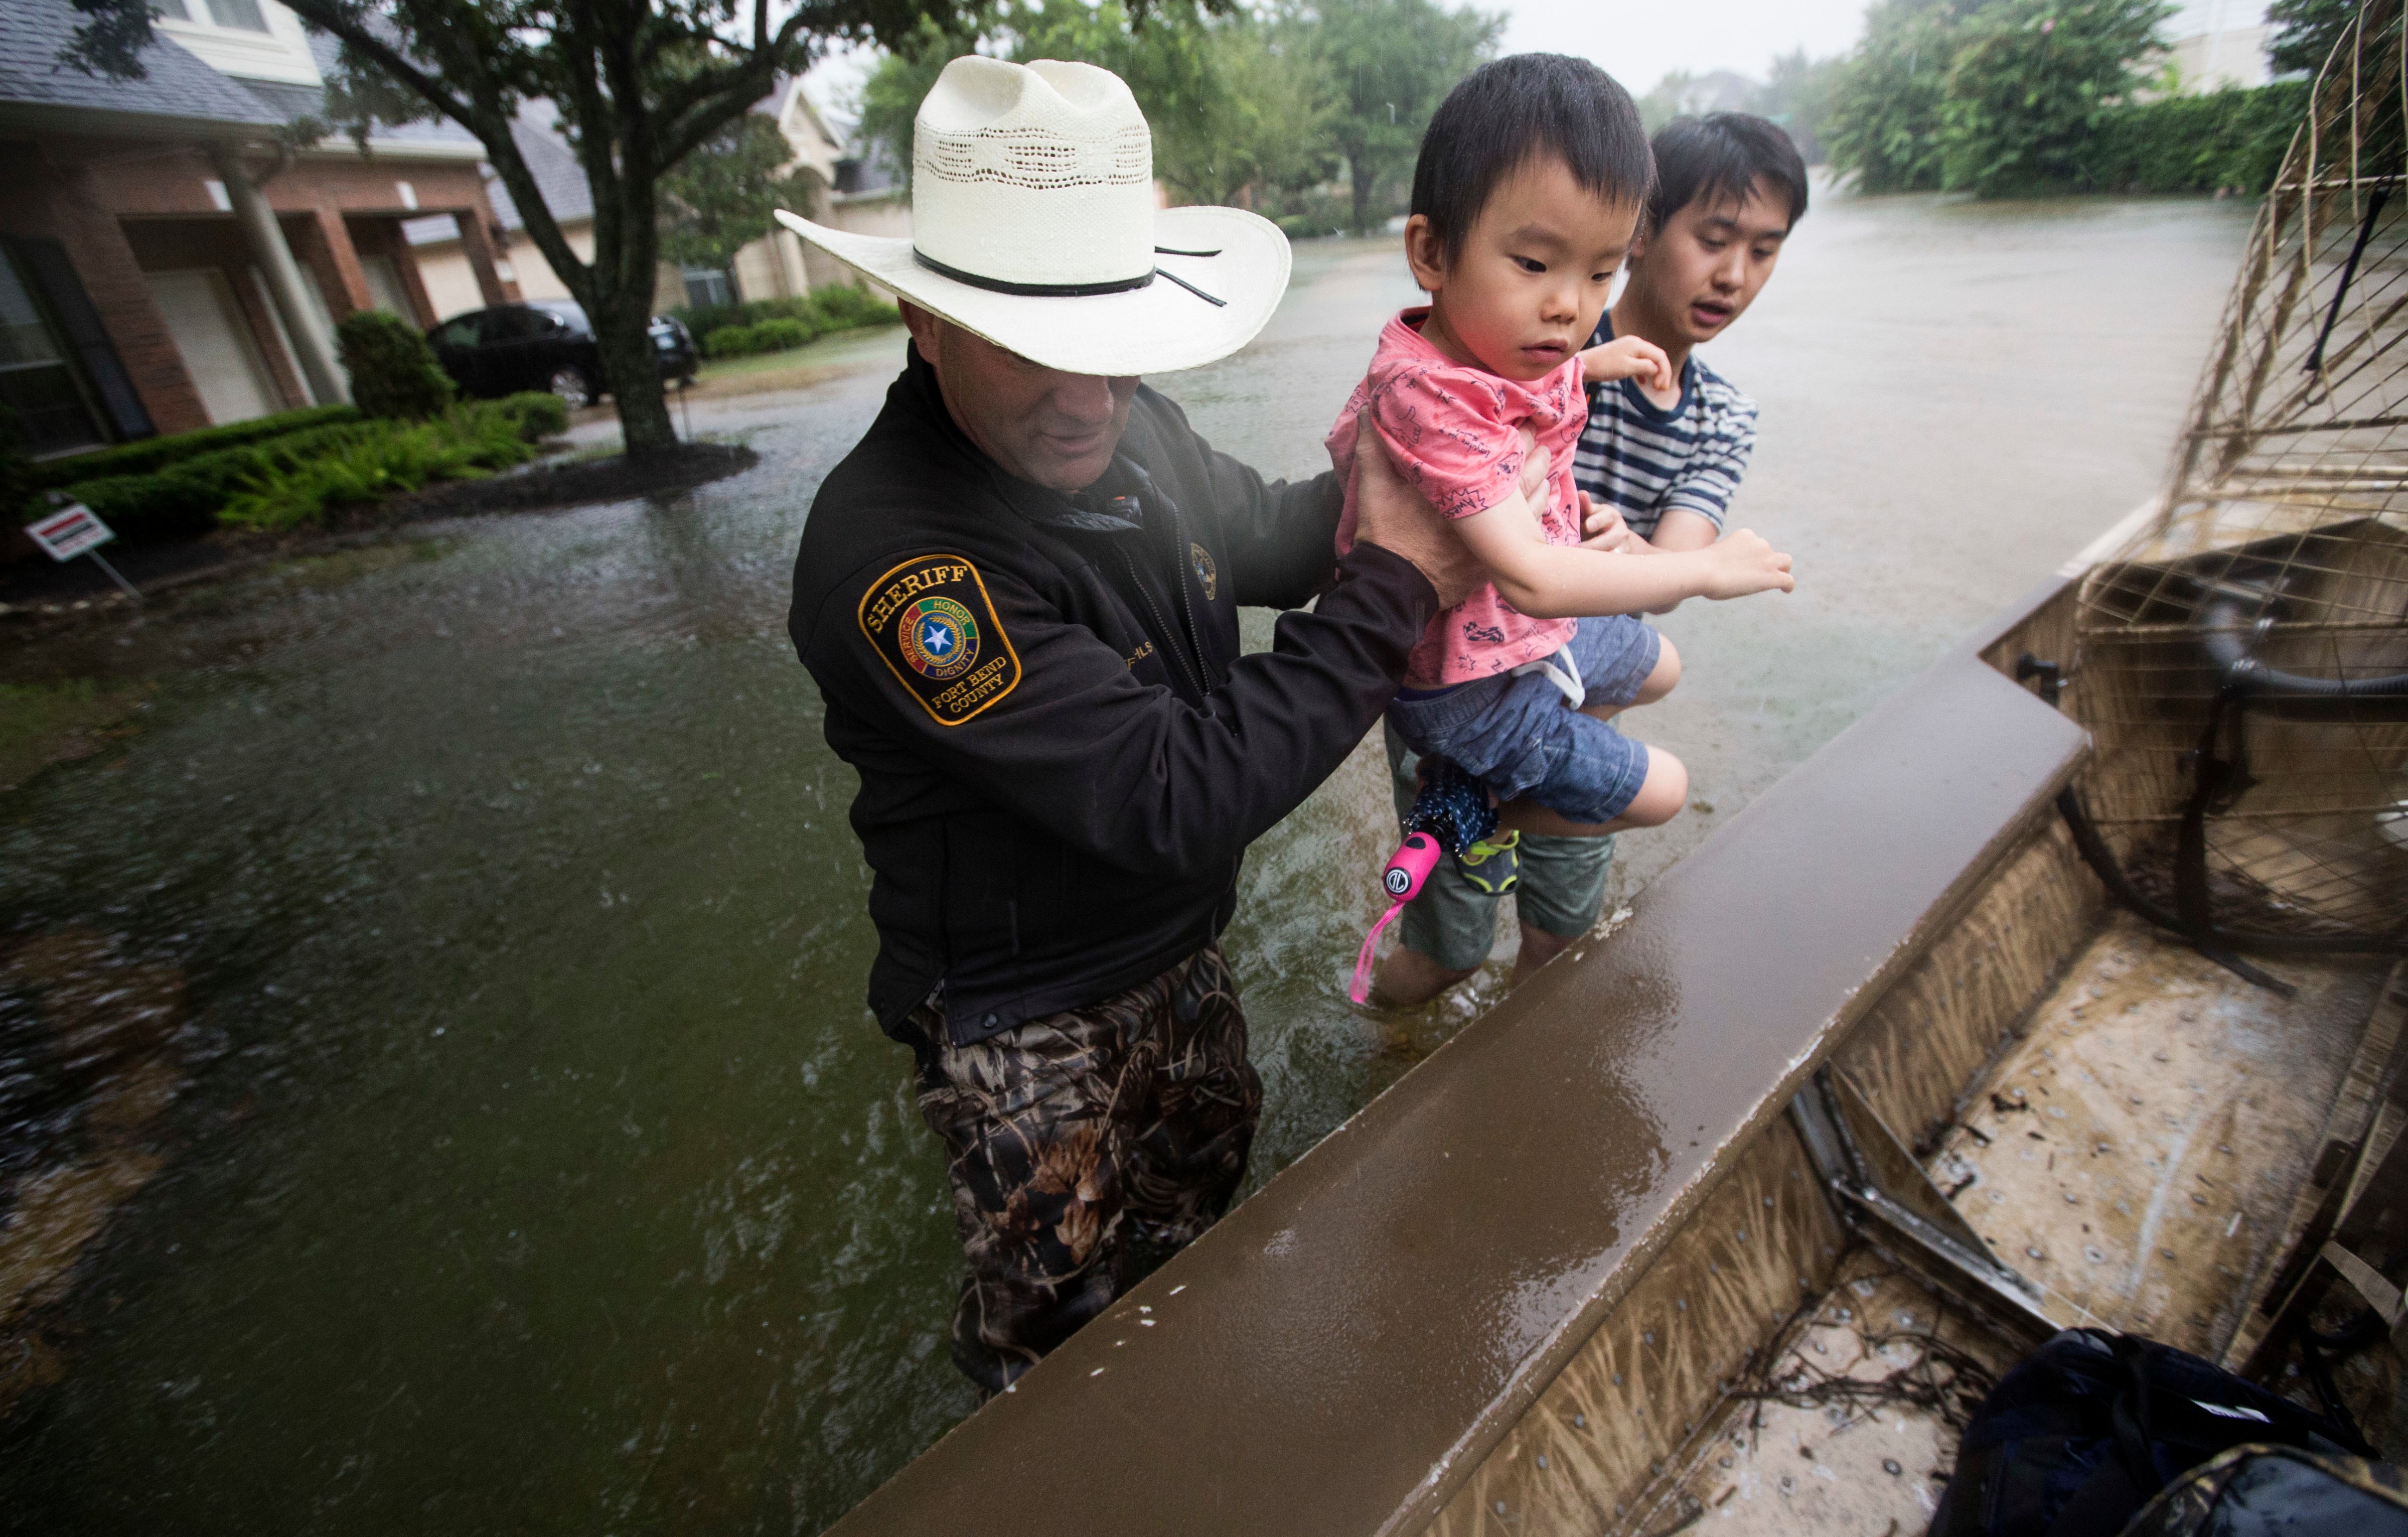 Fort Bend County Sheriff Troy Nehls and Lucas Wu lift Ethan Wu into an airboat as they are evacuated from rising waters from Tropical Storm Harvey, at the Orchard Lakes subdivision on Sunday, Aug. 27, 2017, in unincorporated Fort Bend County, Texas. (Brett Coomer&mdash;AP)